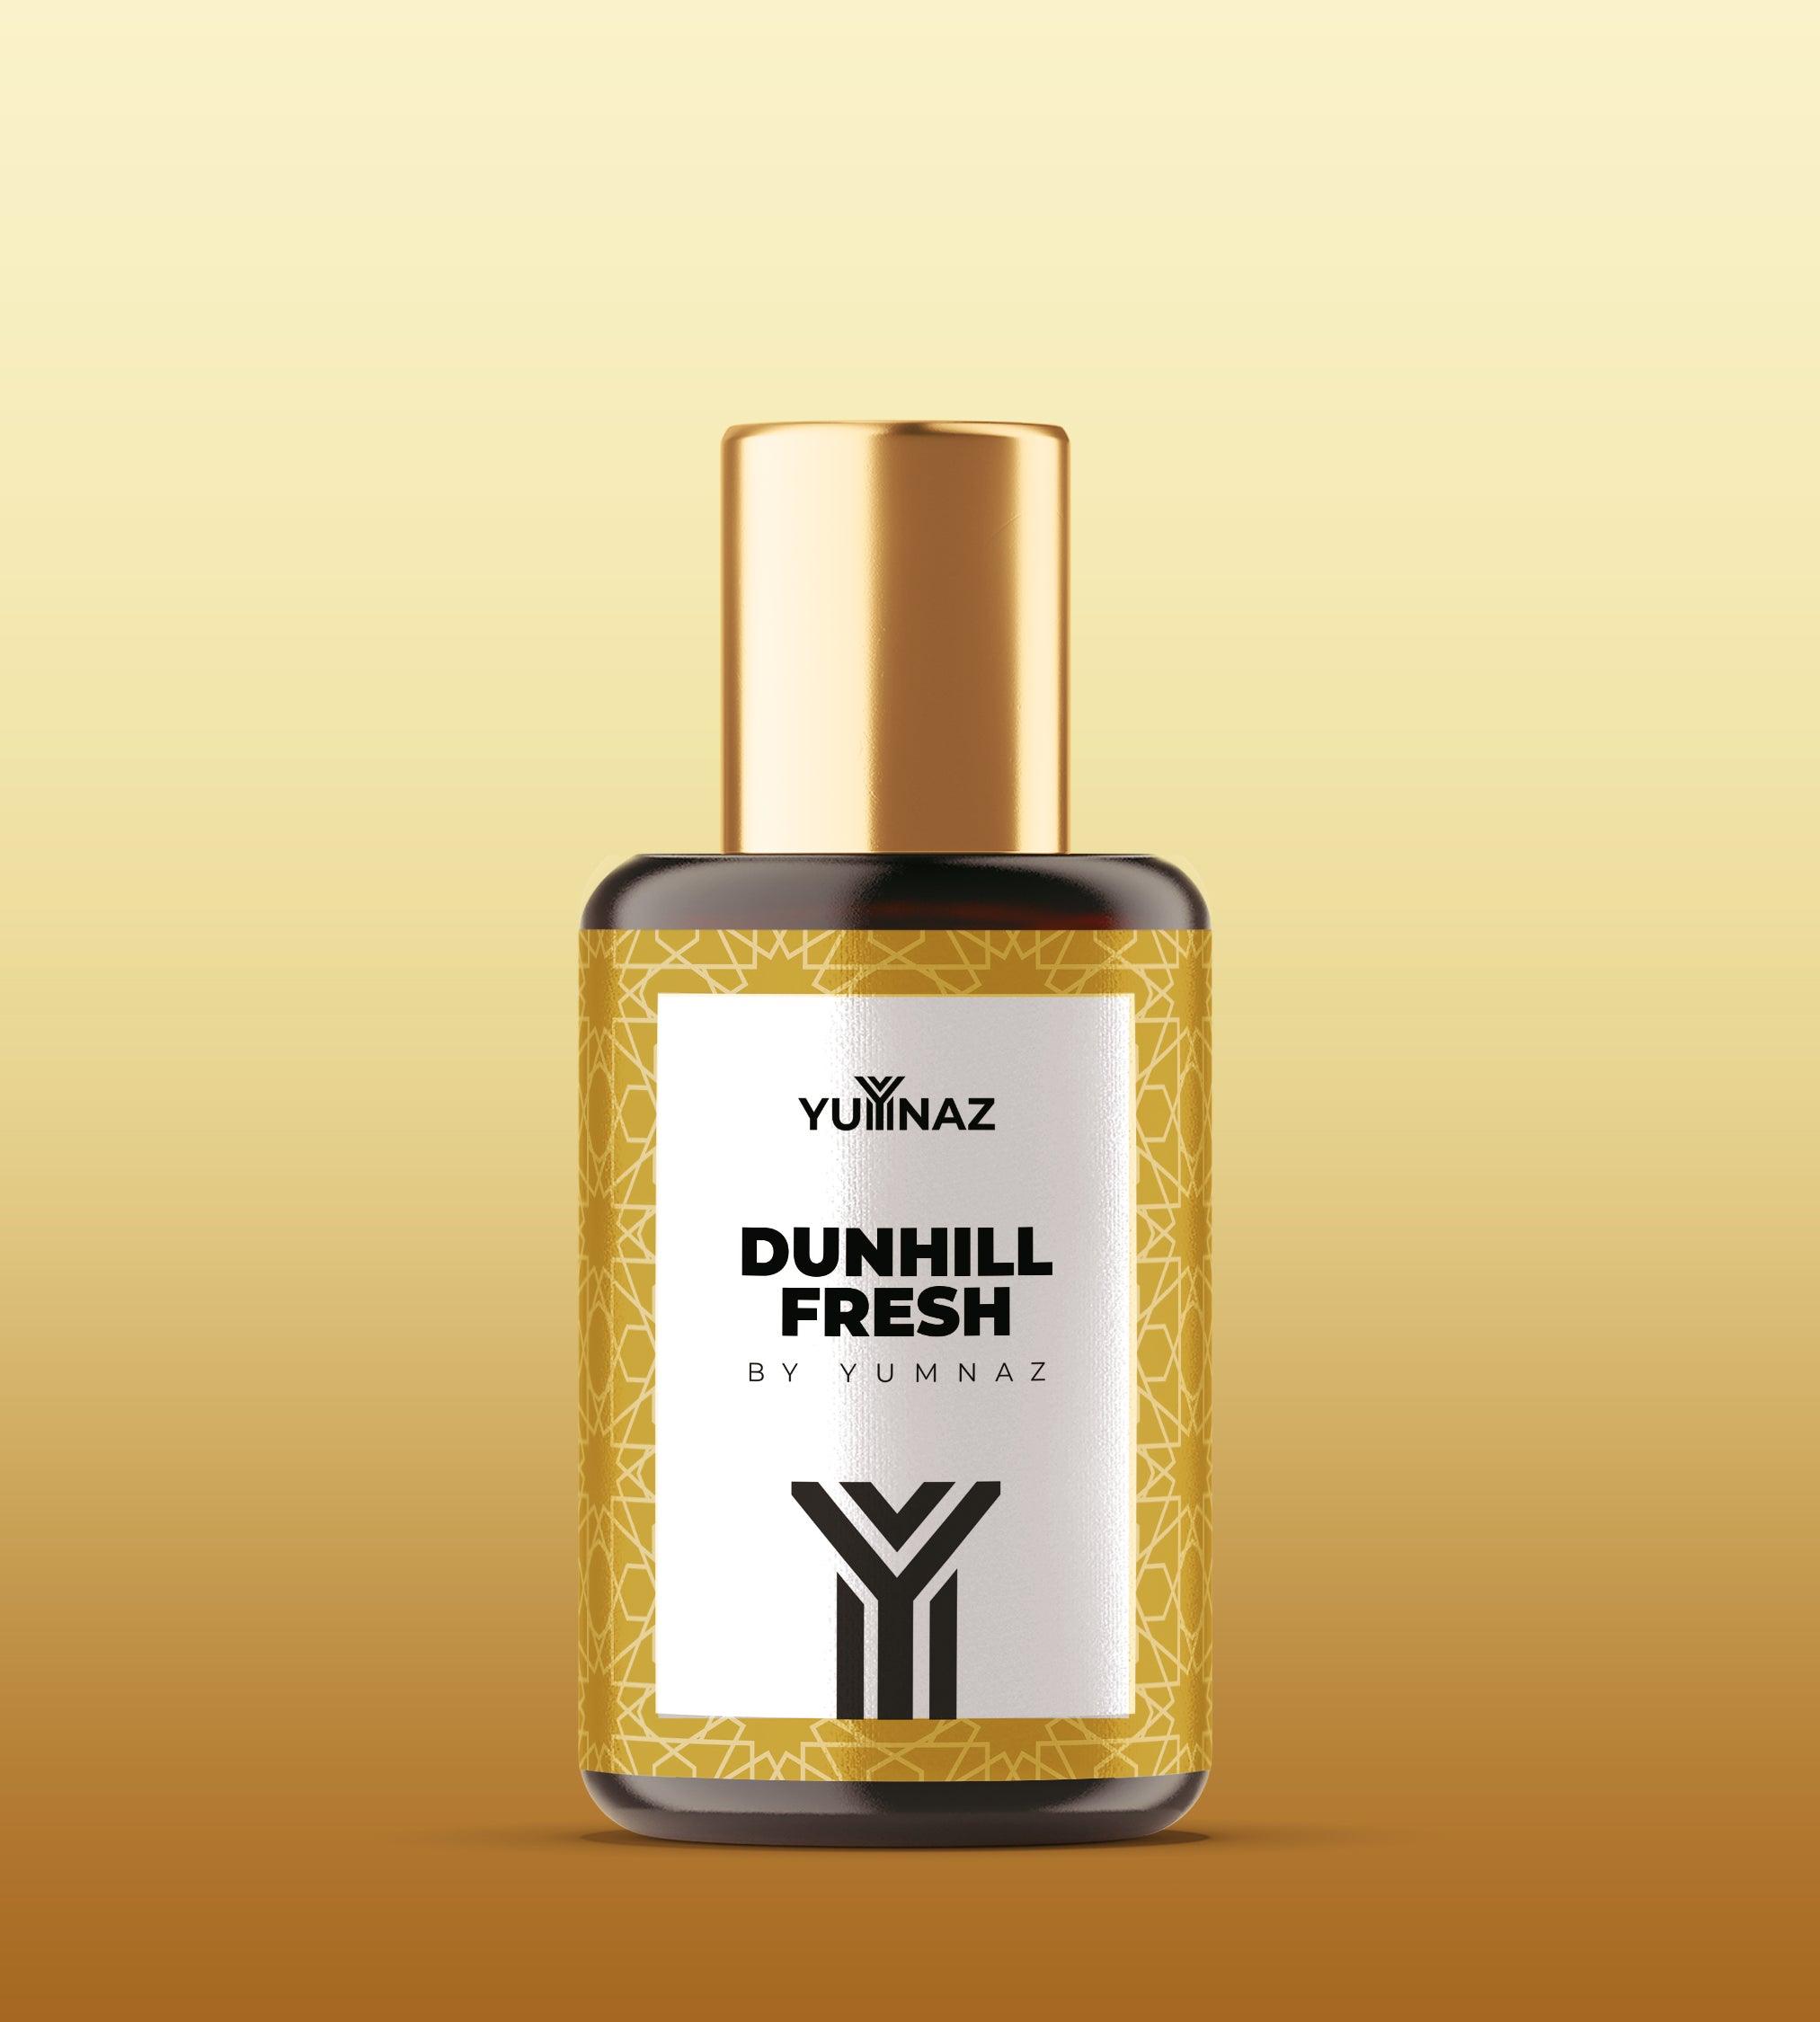 DUNHILL FRESH Perfume on a discounted price in Pakistan